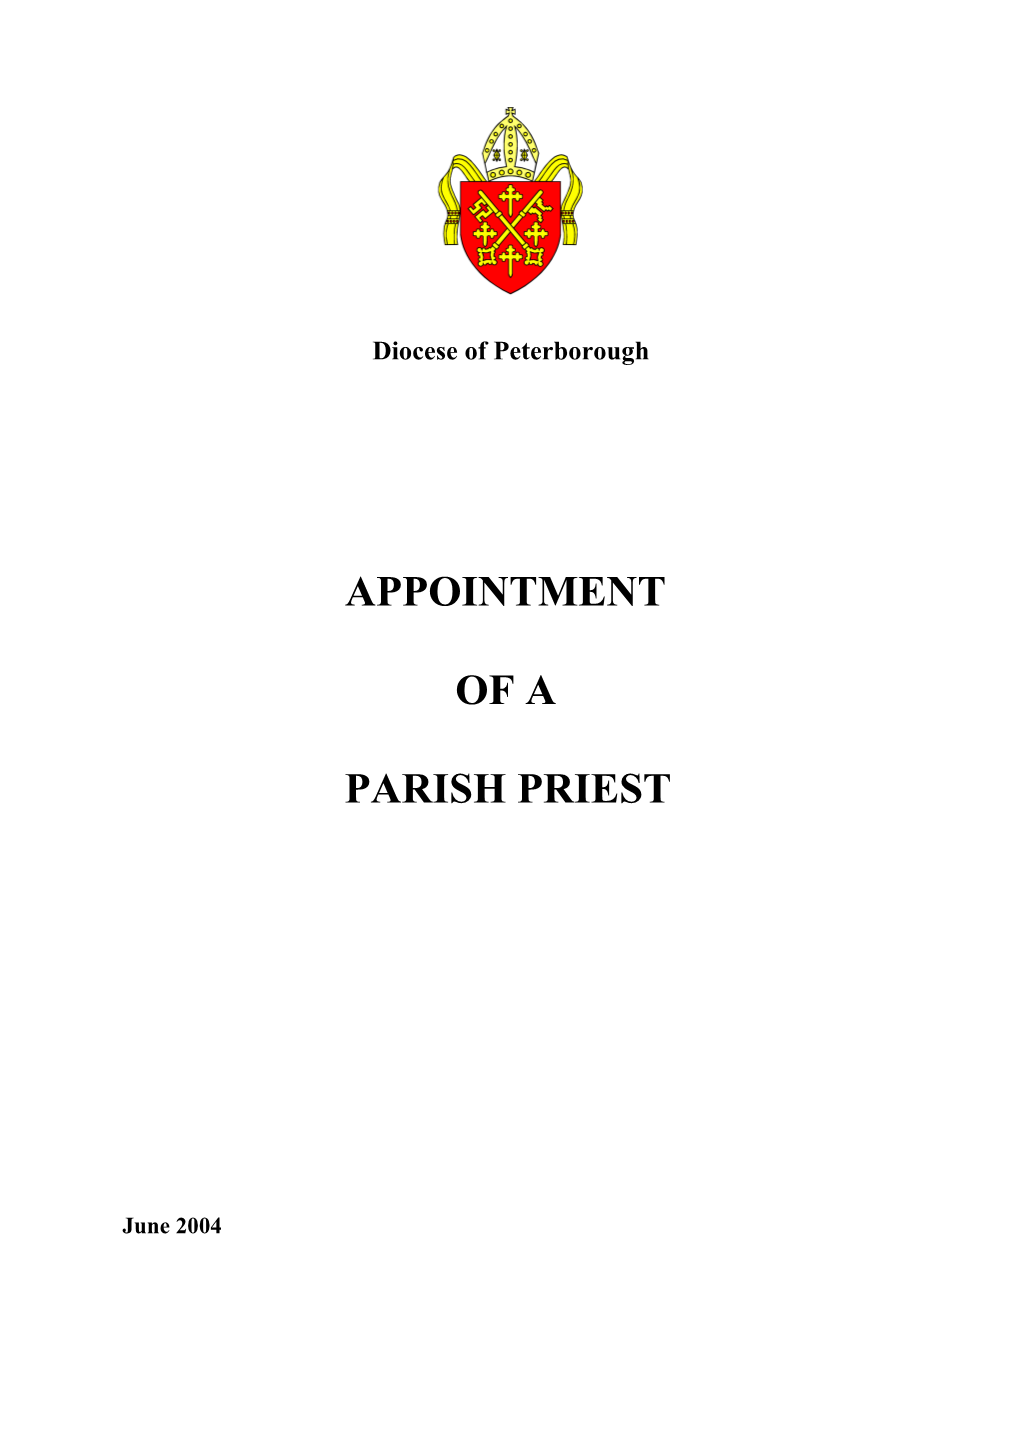 Appointment of a Priest in Charge